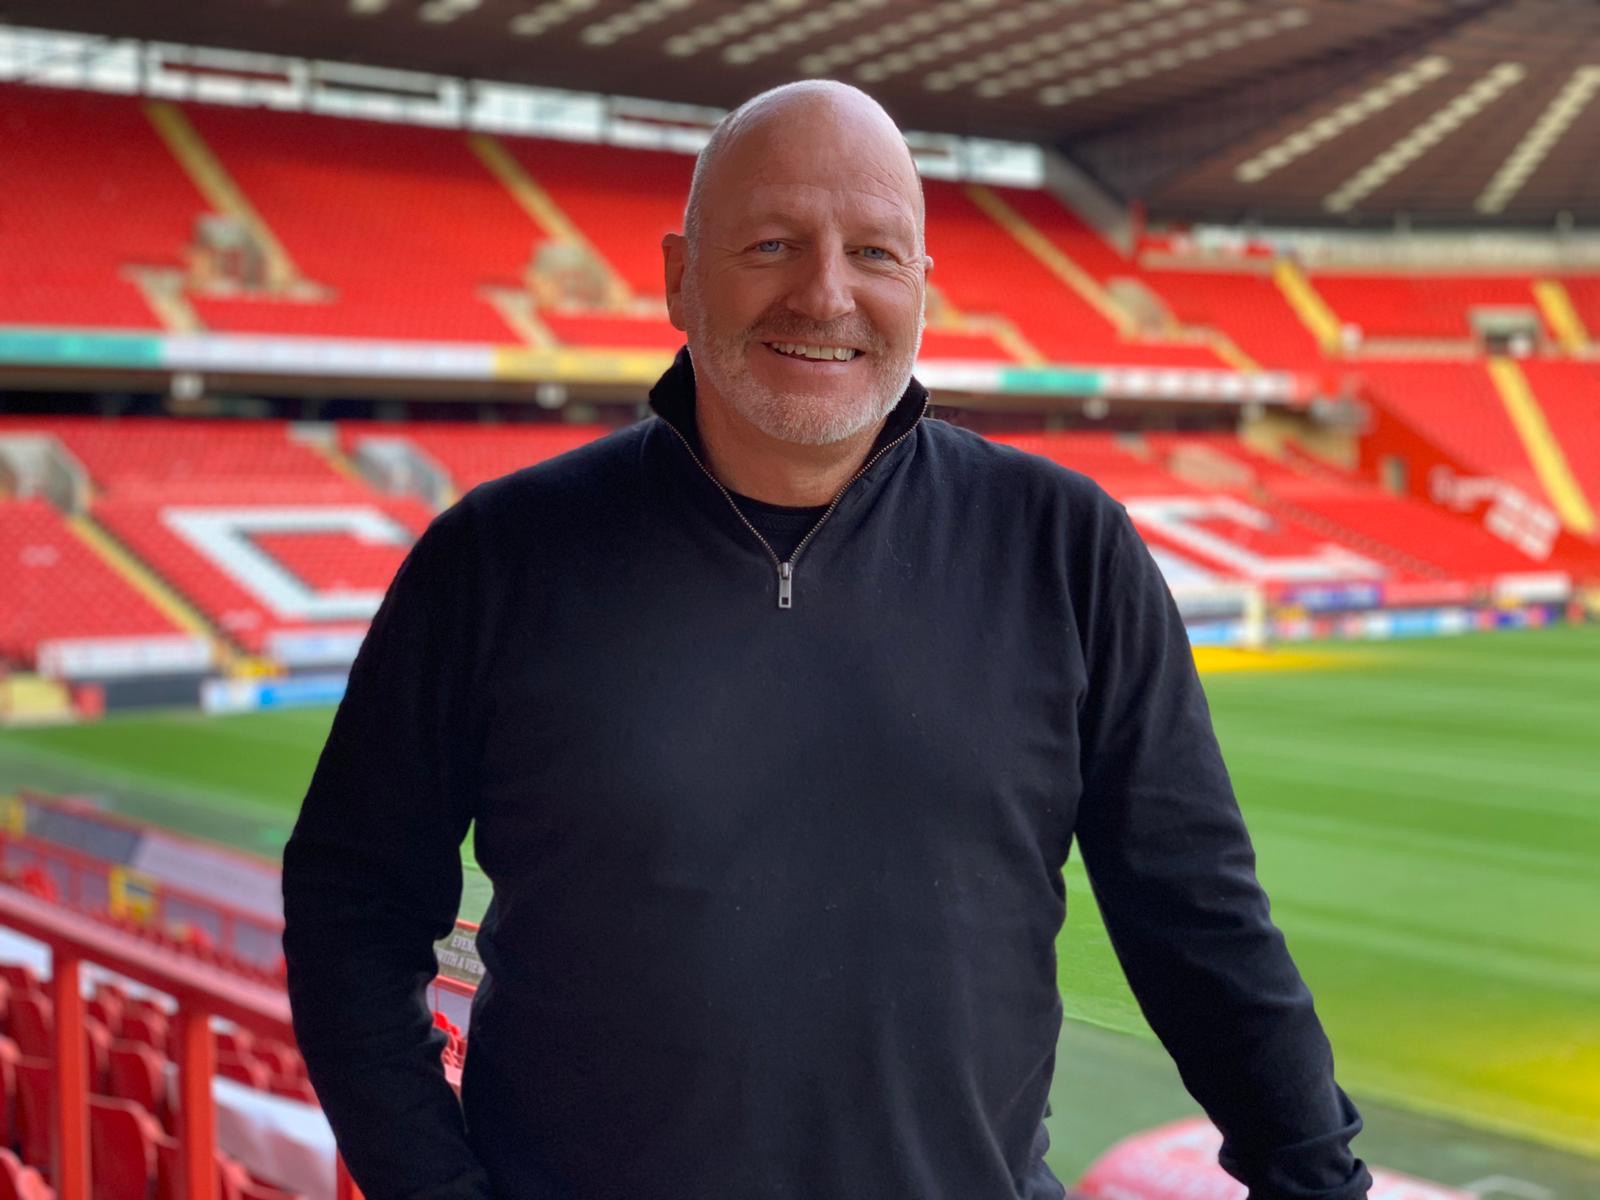 Ged Roddy MBE worked for the Premier League from 2009 to 2017